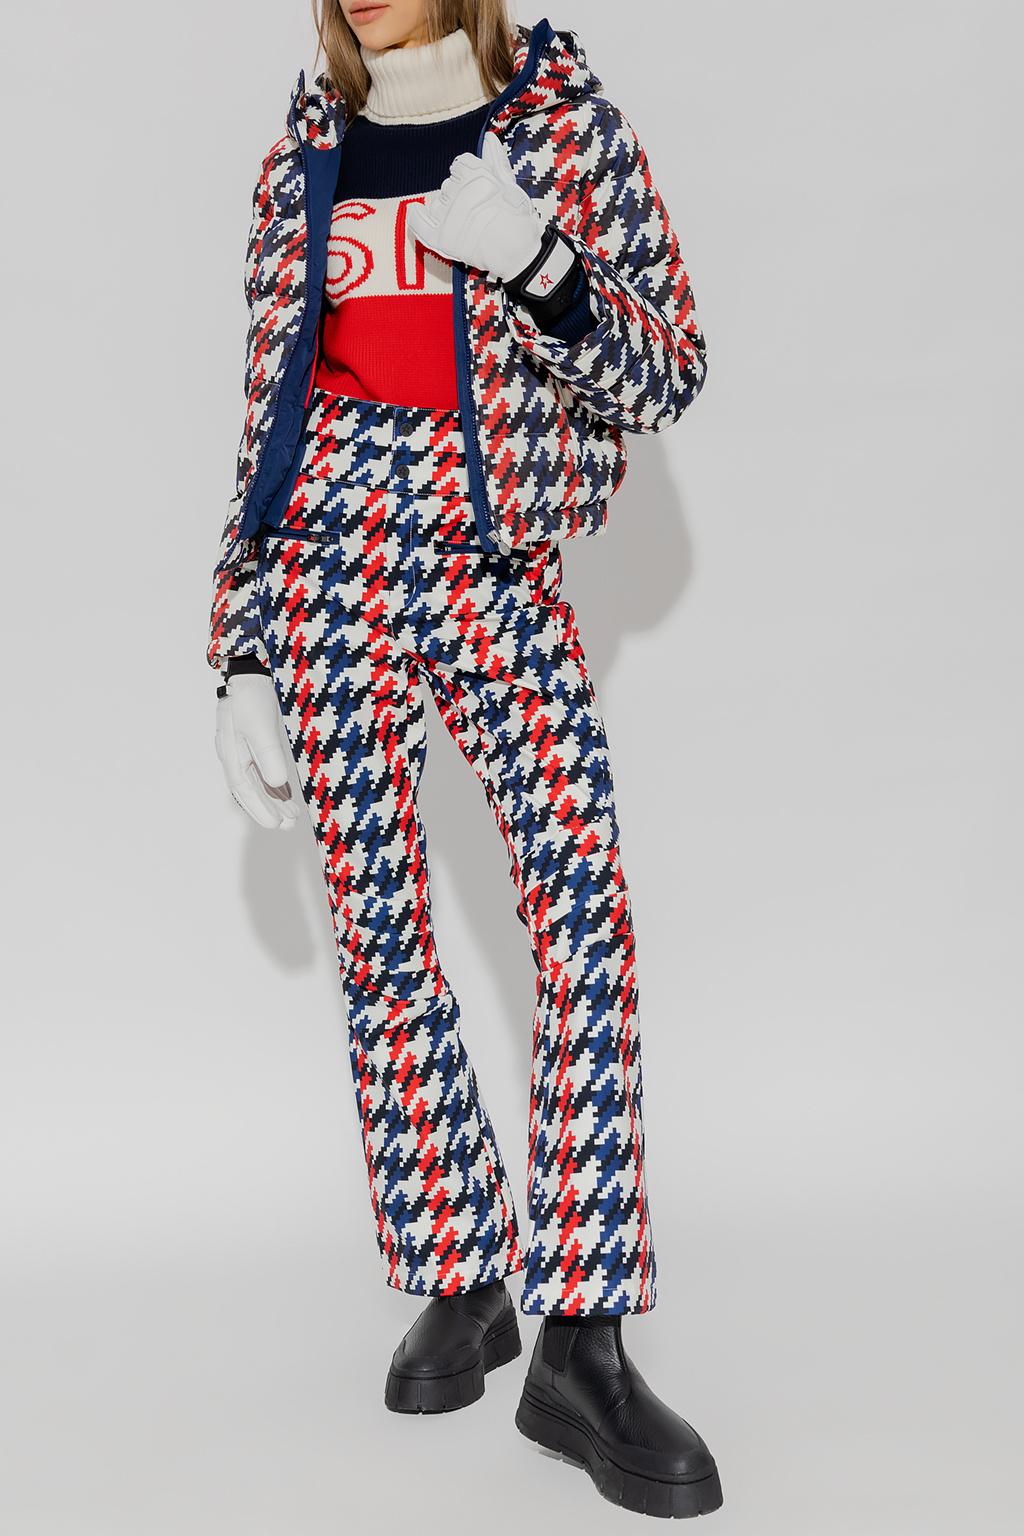 Red Houndstooth Aurora Skinny Ski Pants by Perfect Moment